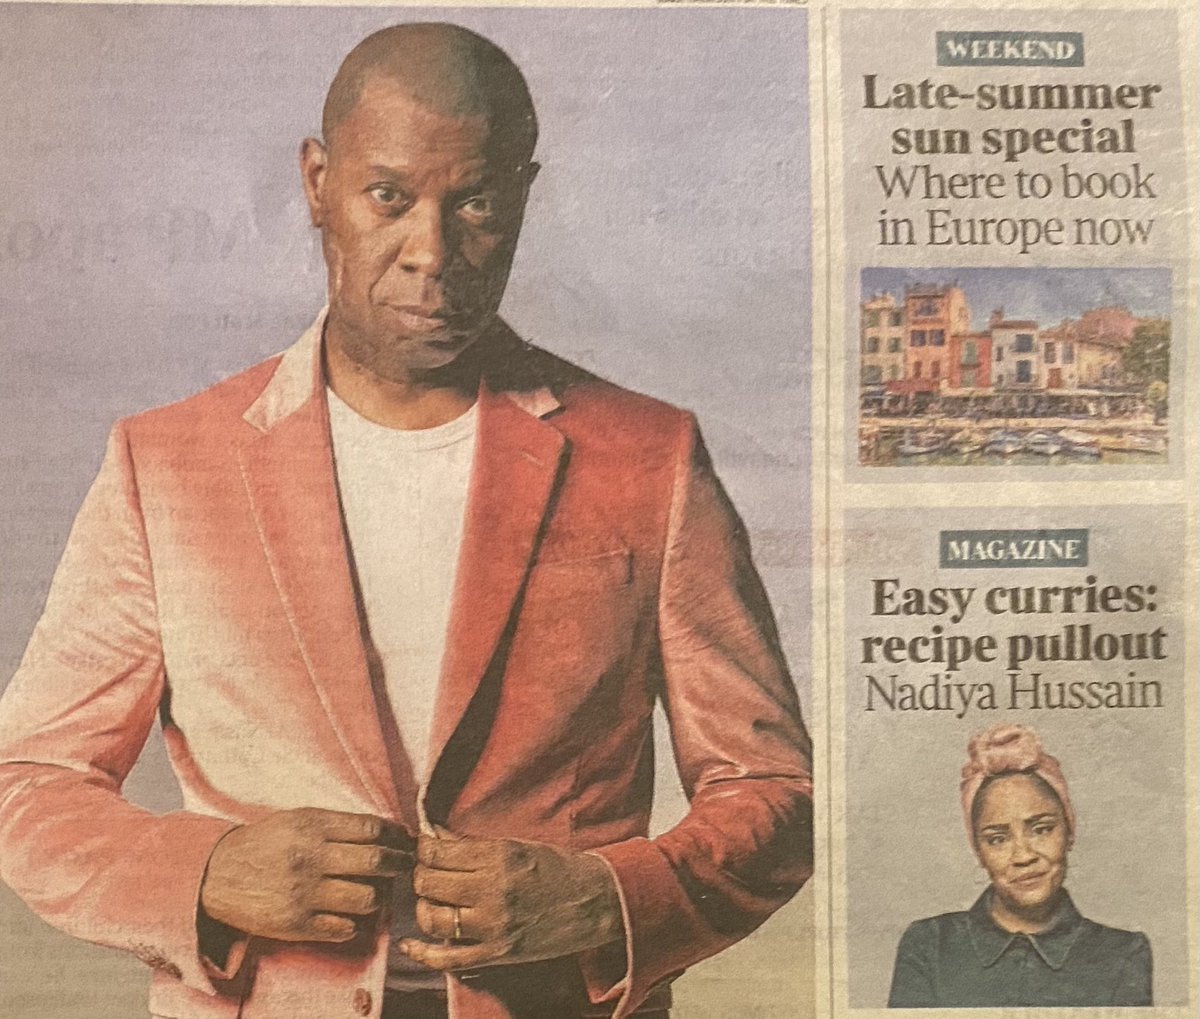 We’ll also be welcoming Nadiya Hussain @BegumNadiya at #ChiswickBookFest. Delighted @thetimes has put her and @CliveMyrieBBC together on its front page! She’s speaking on Saturday September 9th with Jo Pratt @cookwithjopratt @StMichaelsW4 - tickets here: ticketsource.co.uk/chiswickbookfe…